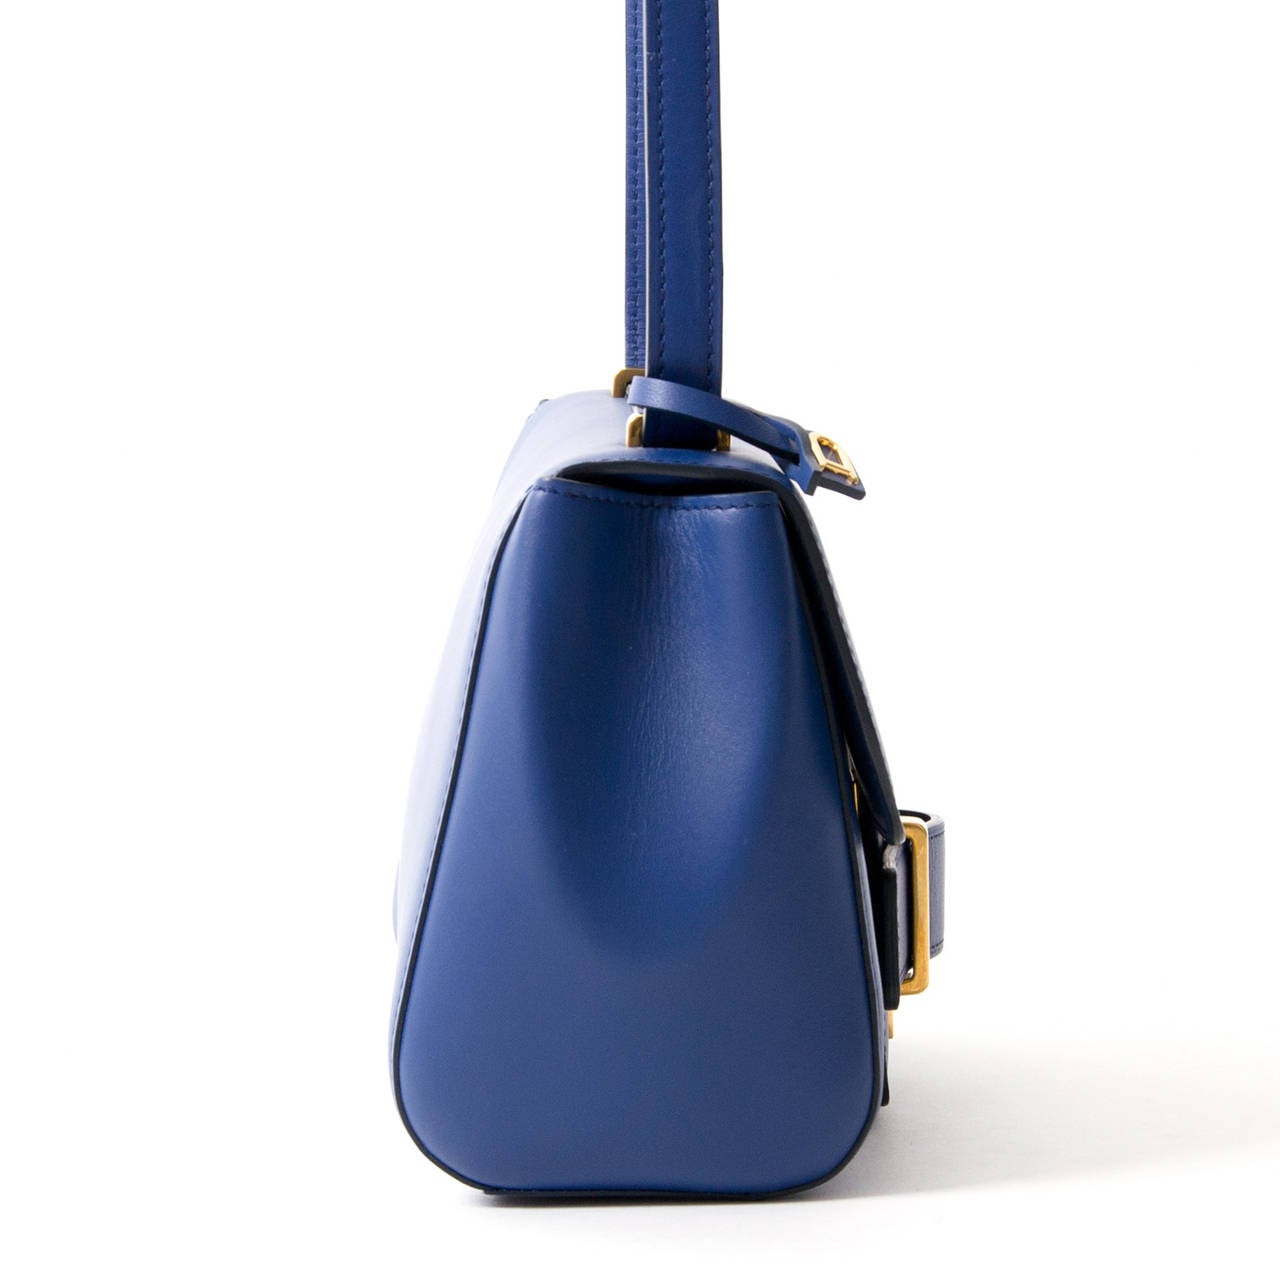 This bag by luxury Belgian leather goods brand Delvaux comes in blue leather and has gold hardware throughout.

Notice the iconic D appliqué. Its unique front fastening is the eyecatcher of this elegant but modern bag. A blue leather shoulder